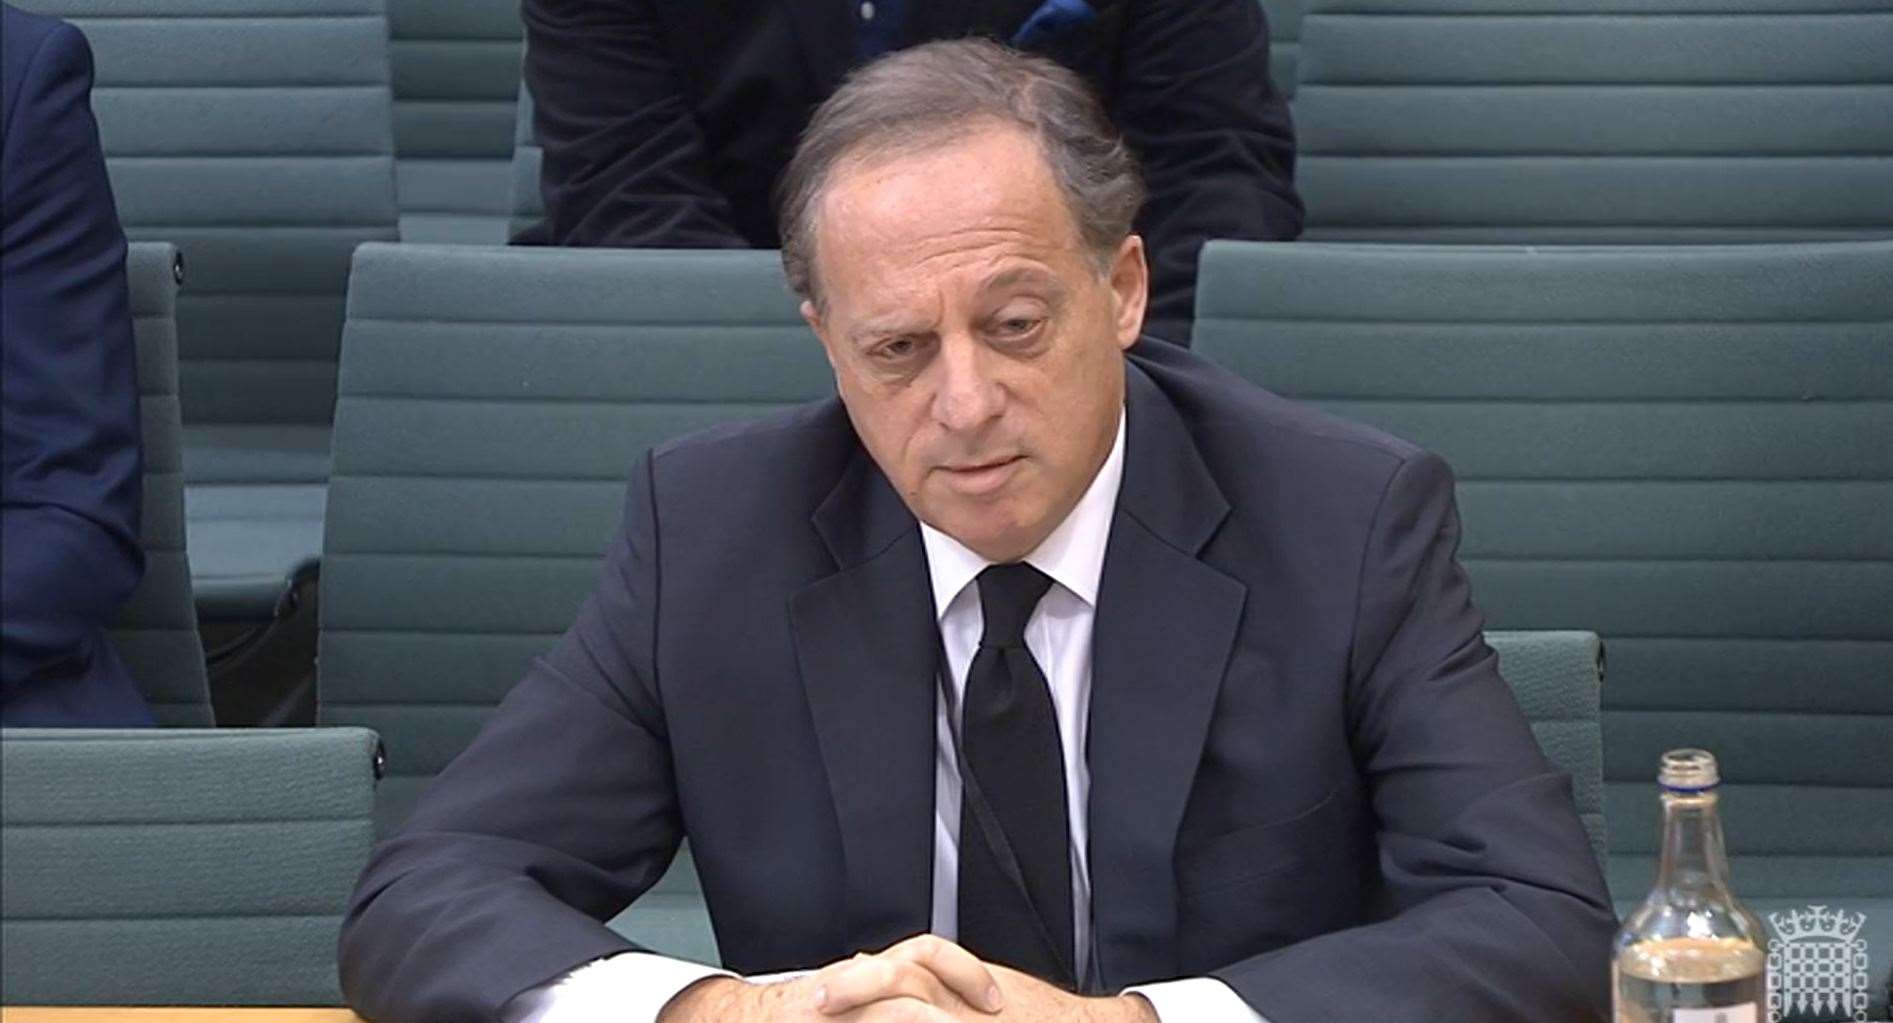 BBC chairman Richard Sharp appearing before the Commons Digital, Culture, Media and Sport Committee (House of Commons)